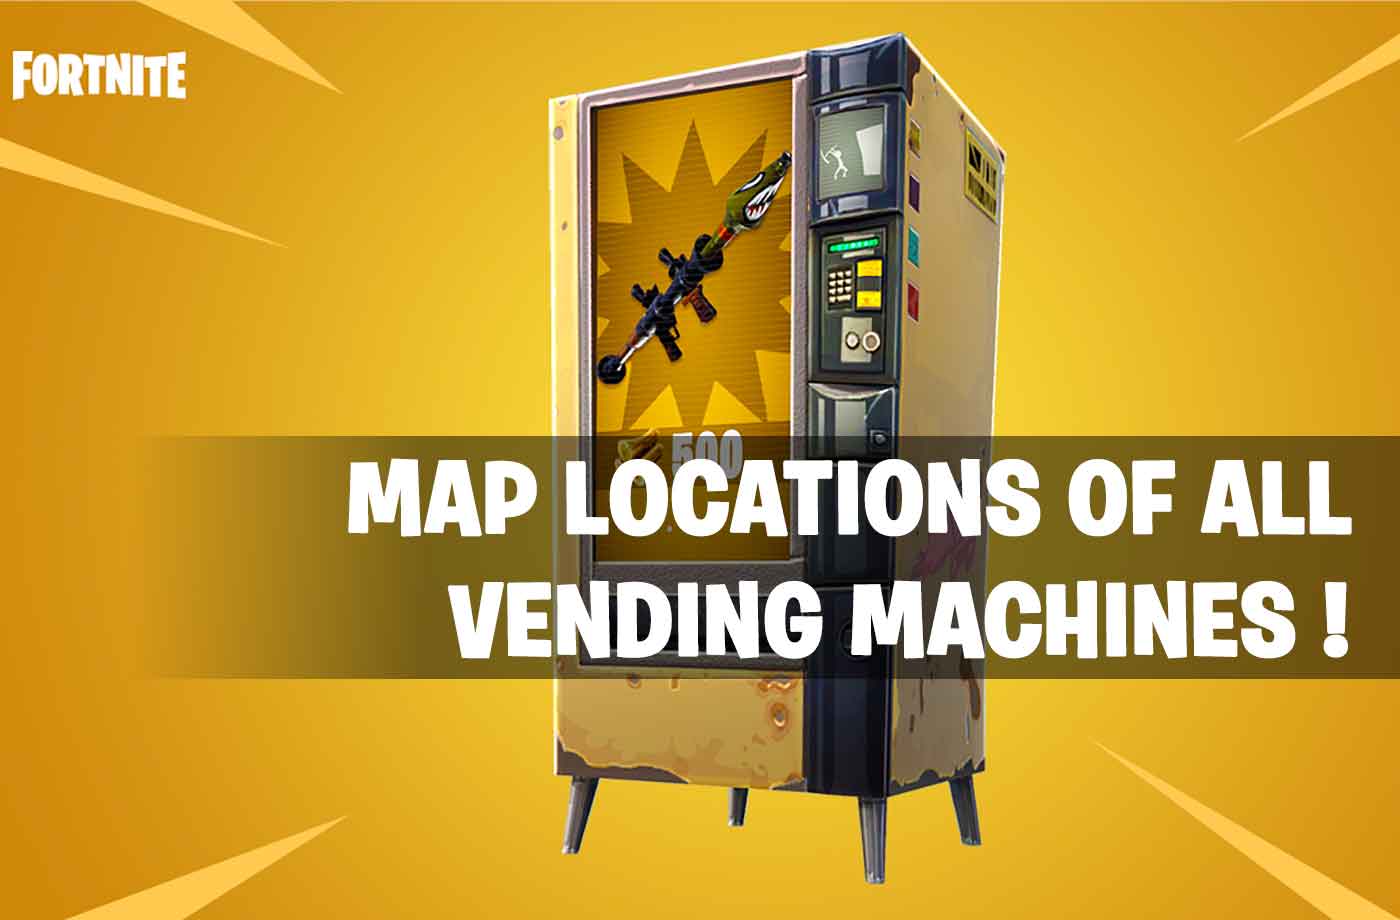 fortnite battle royale map locations of all vending machines - vending machine fortnite map season 8